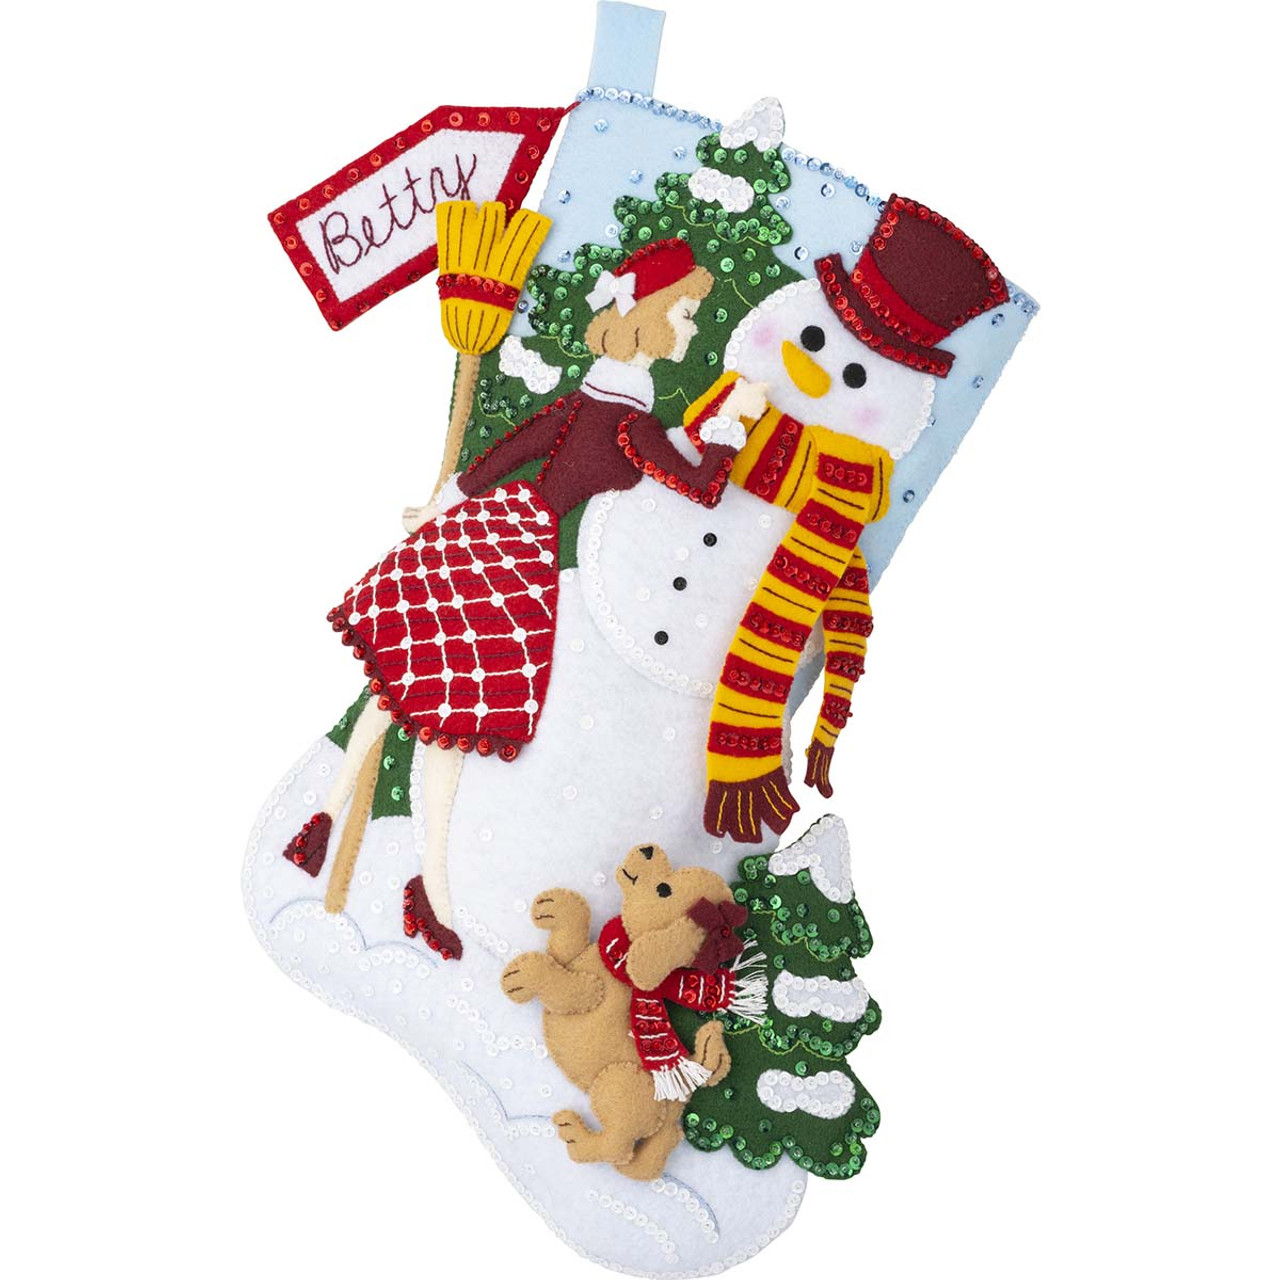 How To Make Painted and Applique Santa Stocking Online